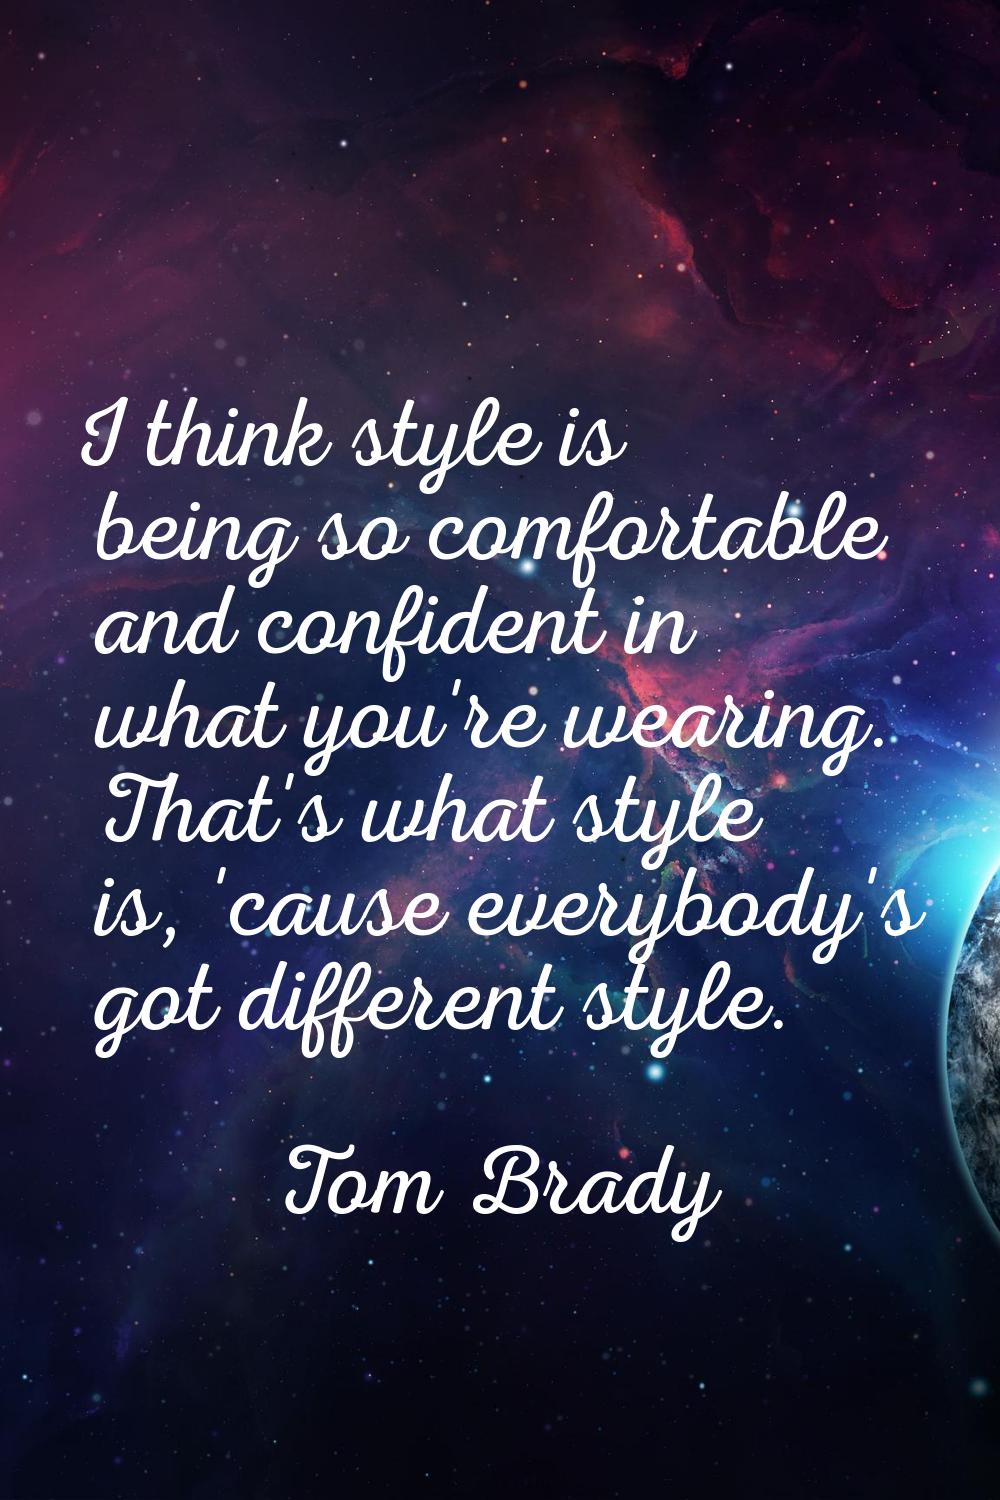 I think style is being so comfortable and confident in what you're wearing. That's what style is, '